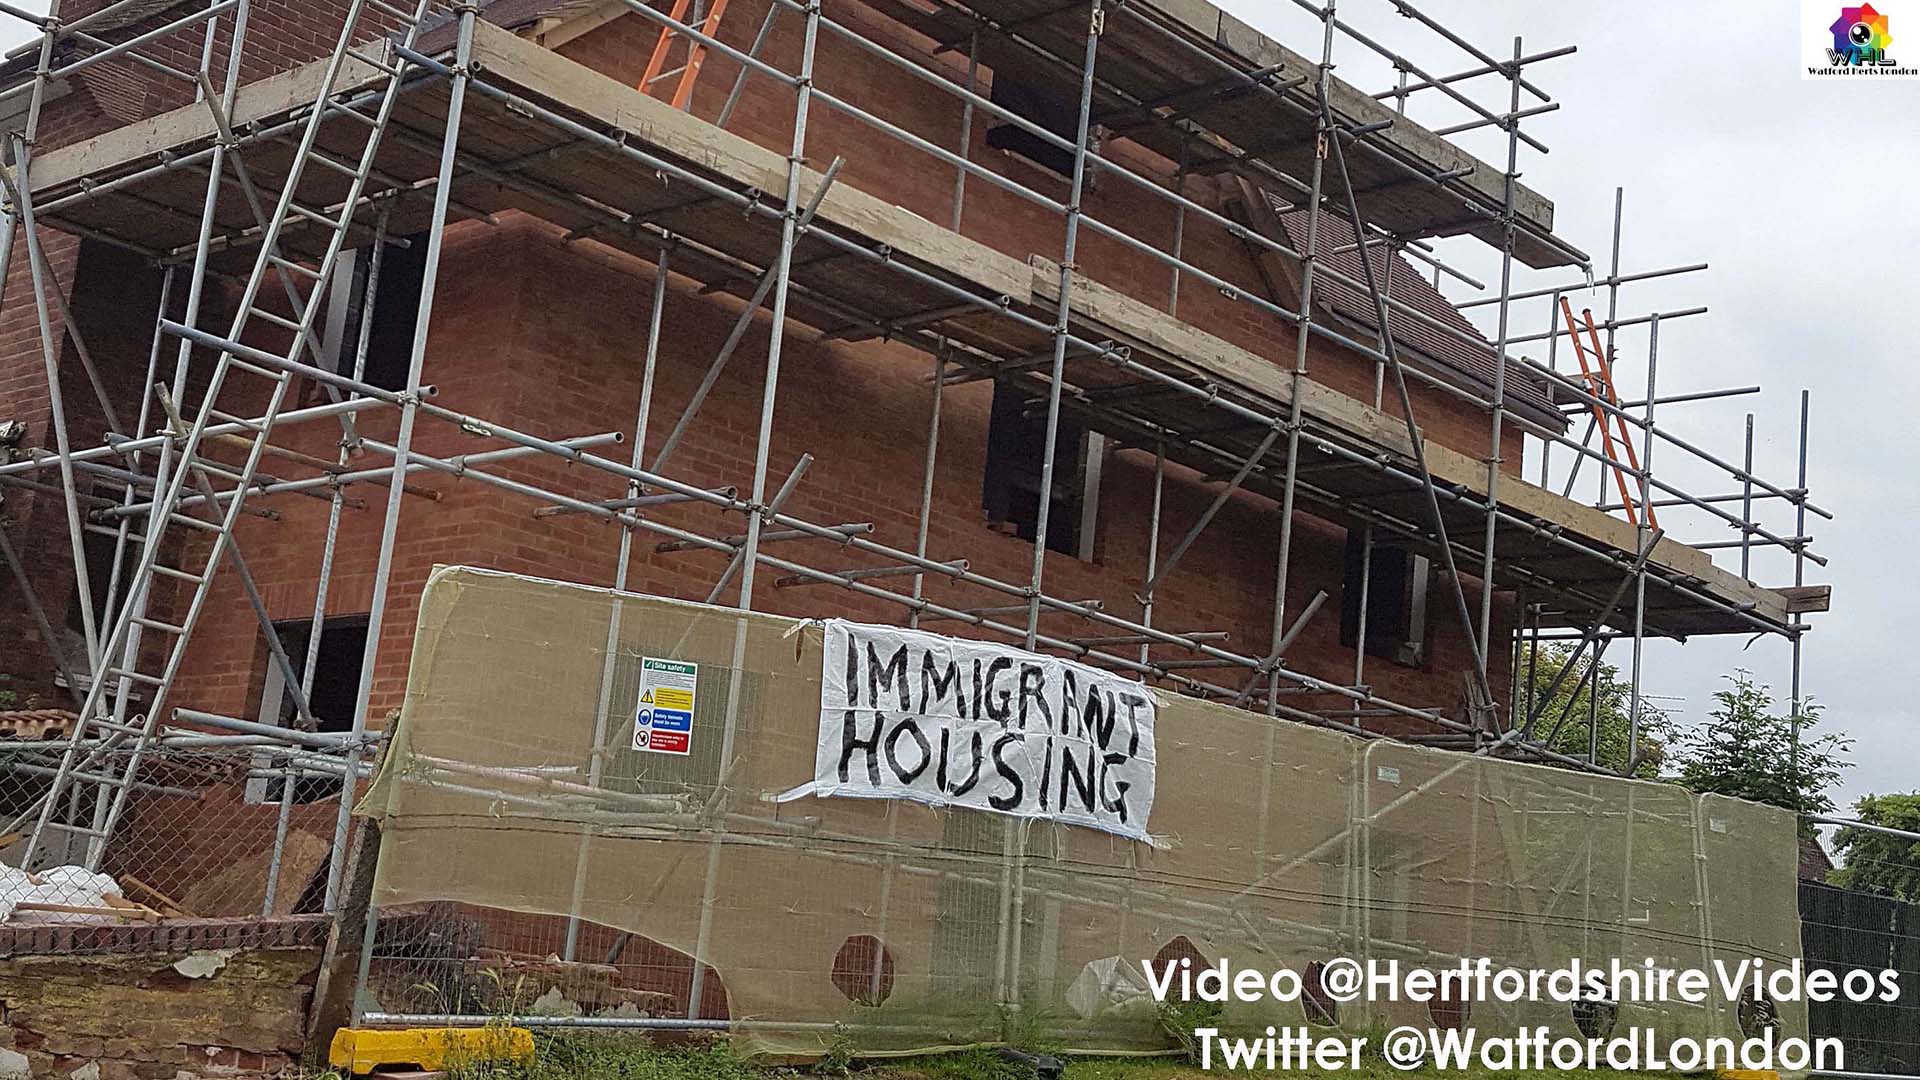 Police Remove Immigrant Housing Graffiti Banner on House in Meriden Watford